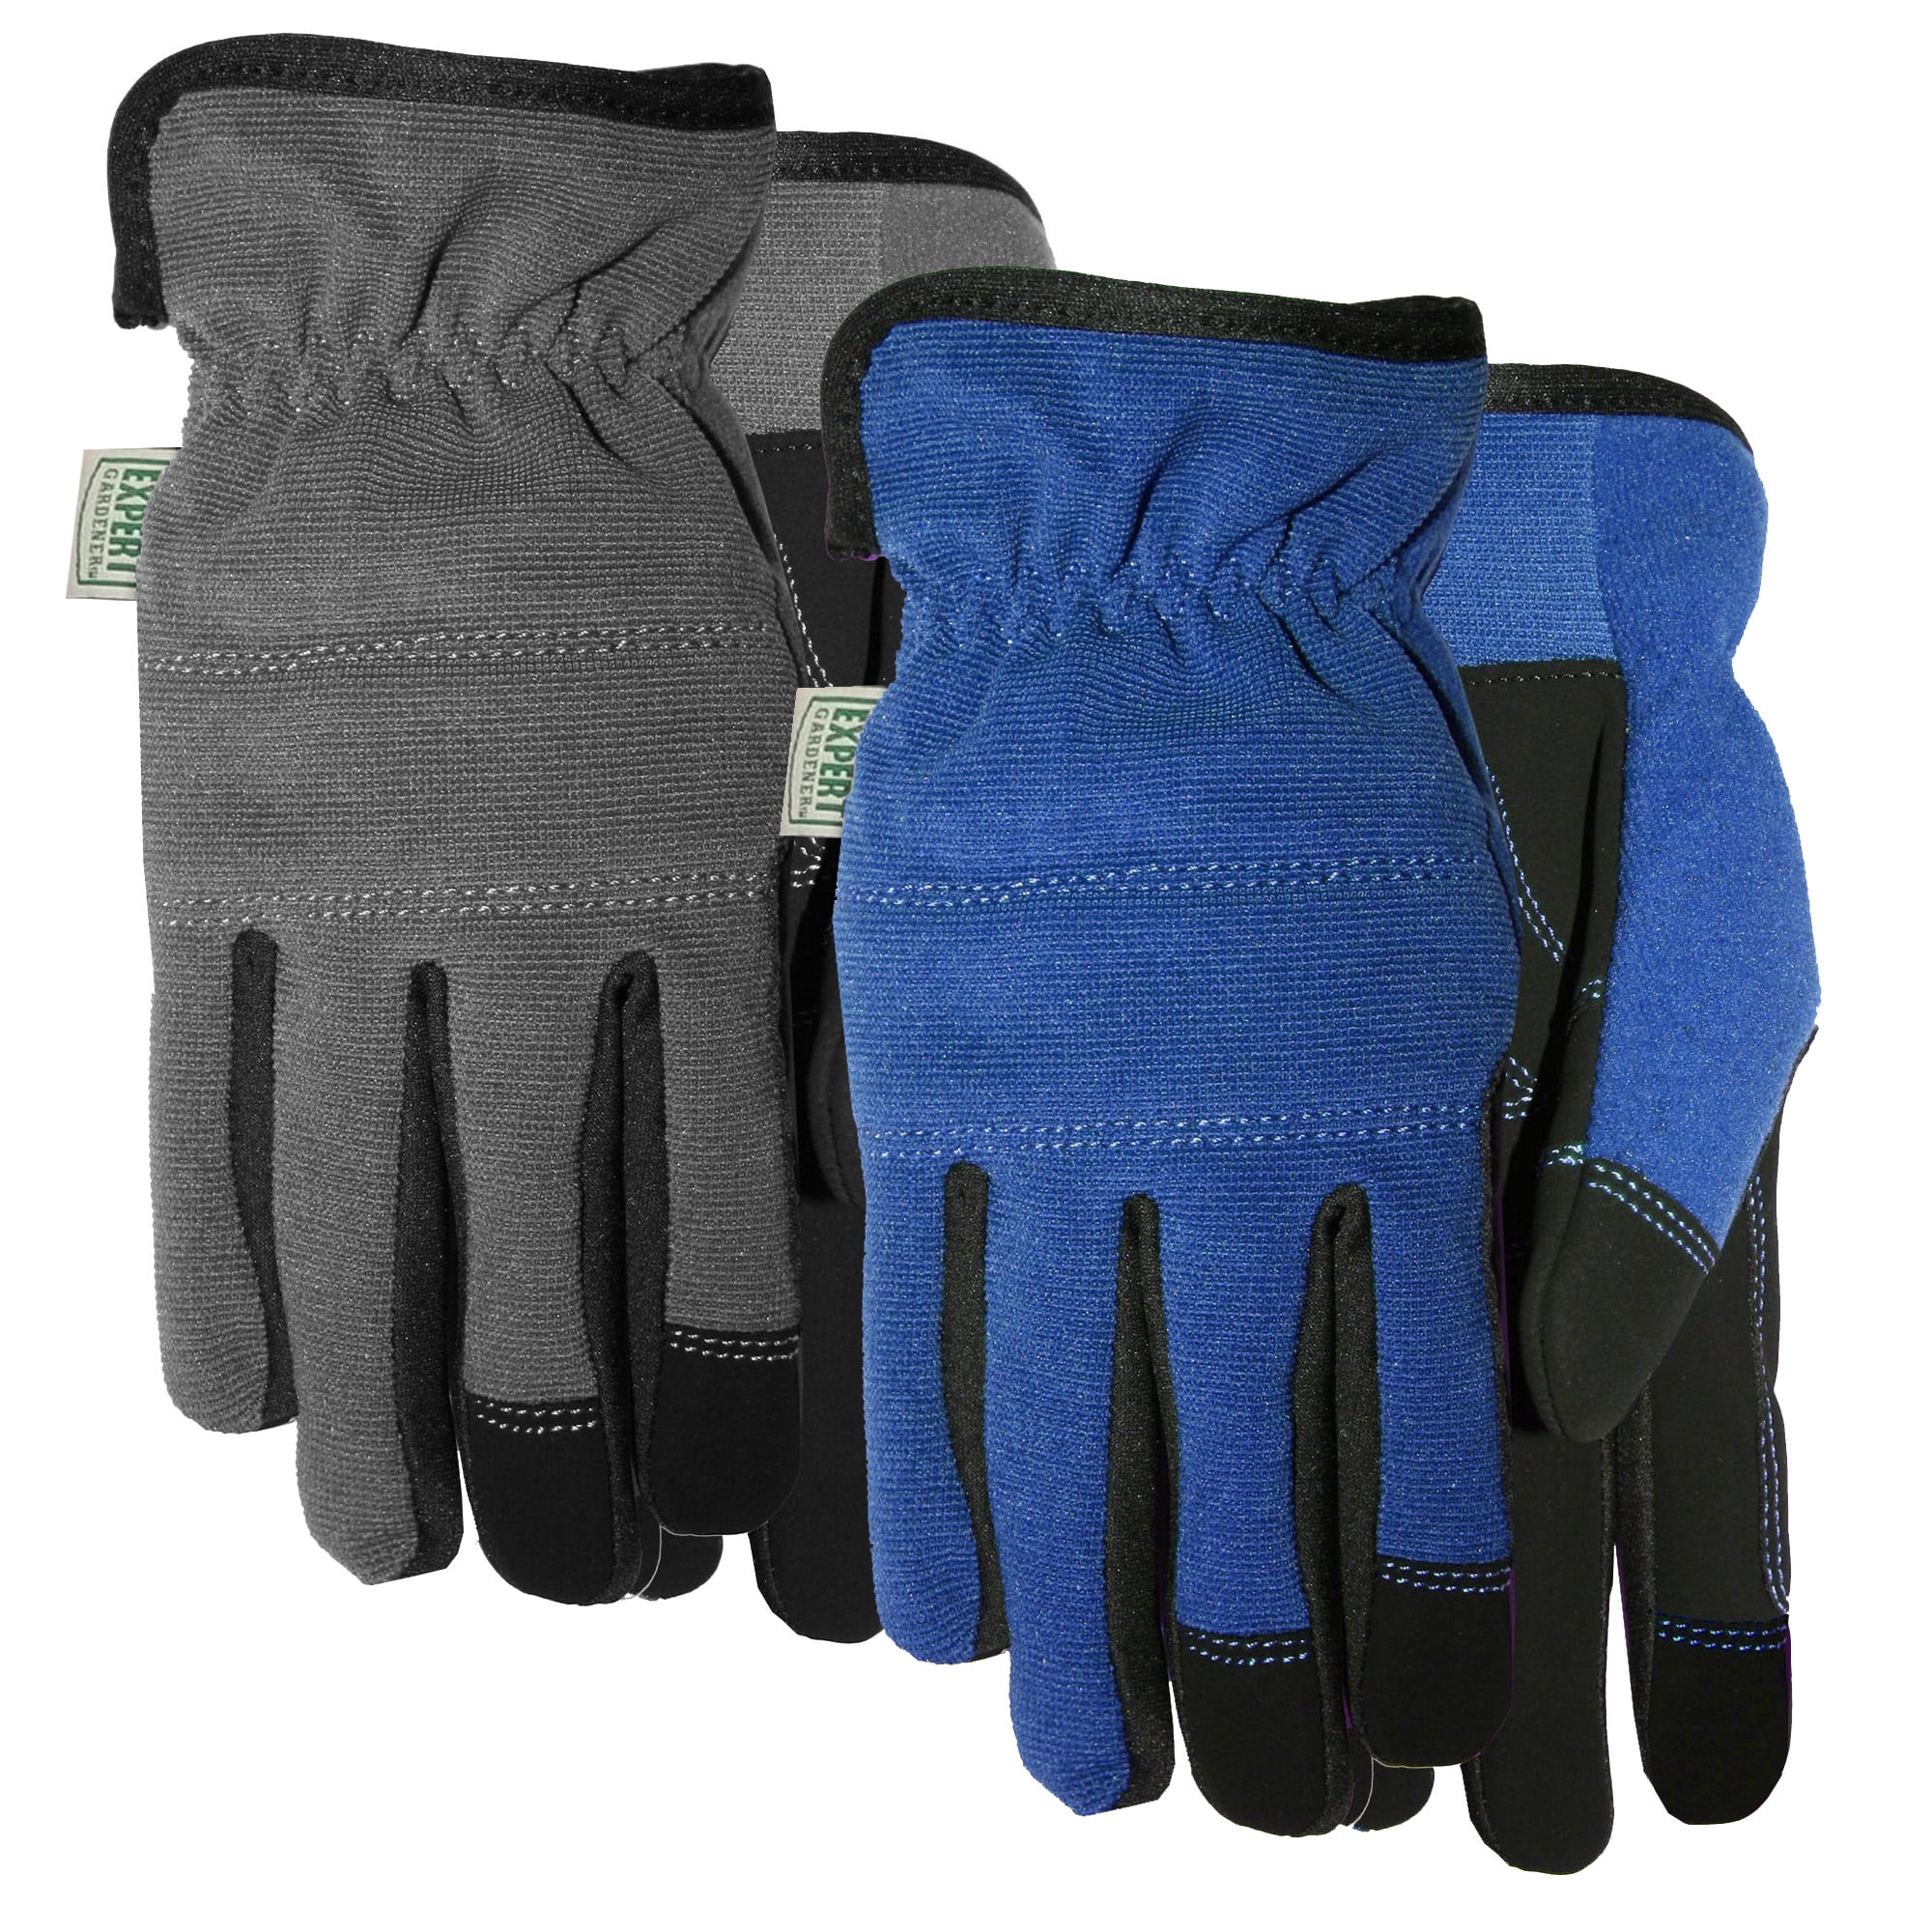 Expert Gardener Adult Unisex Large Synthetic Leather Gloves, Blue & Gray 2 Pack